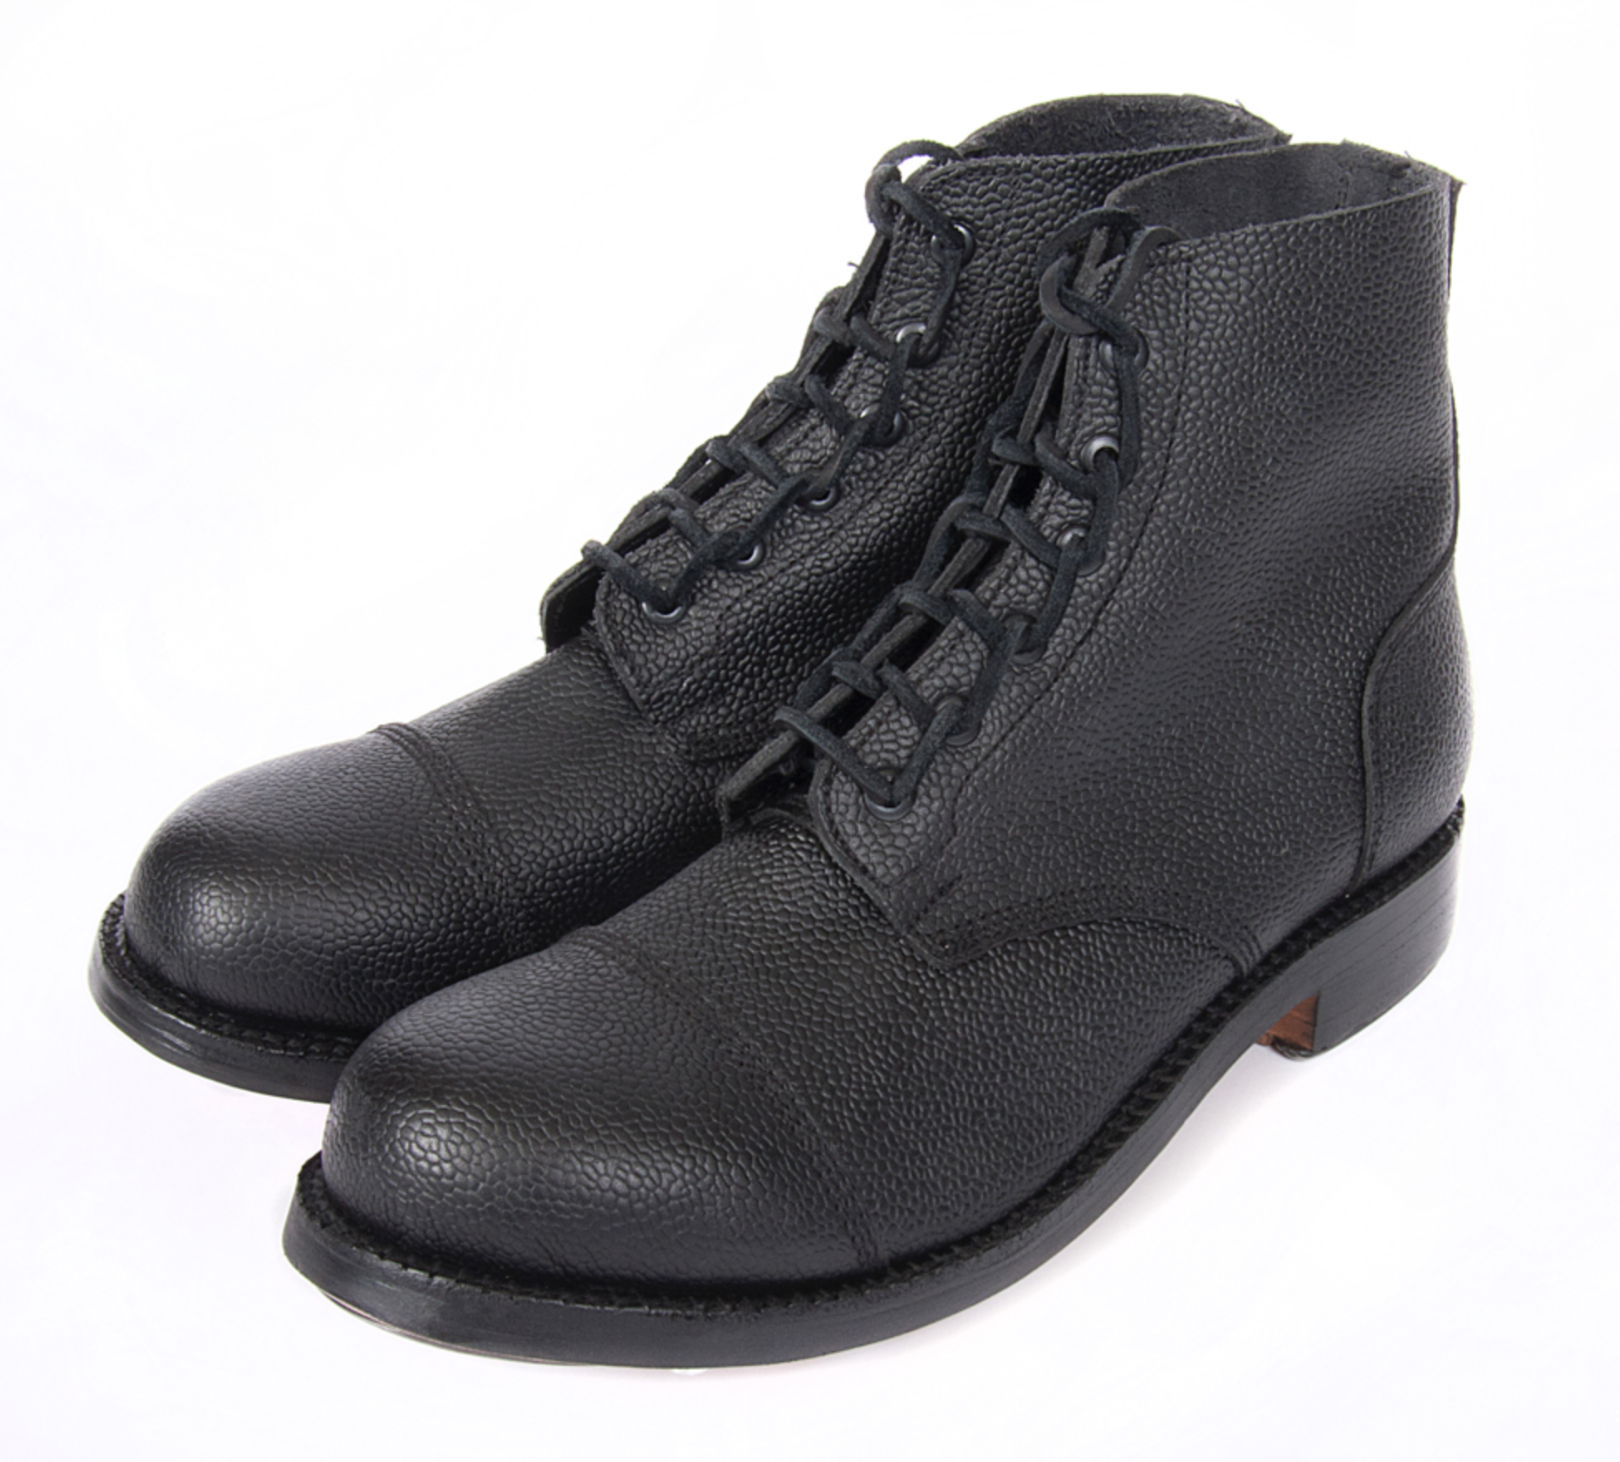 WW2 British Black Ammo Boots All Sizes Avaiable 